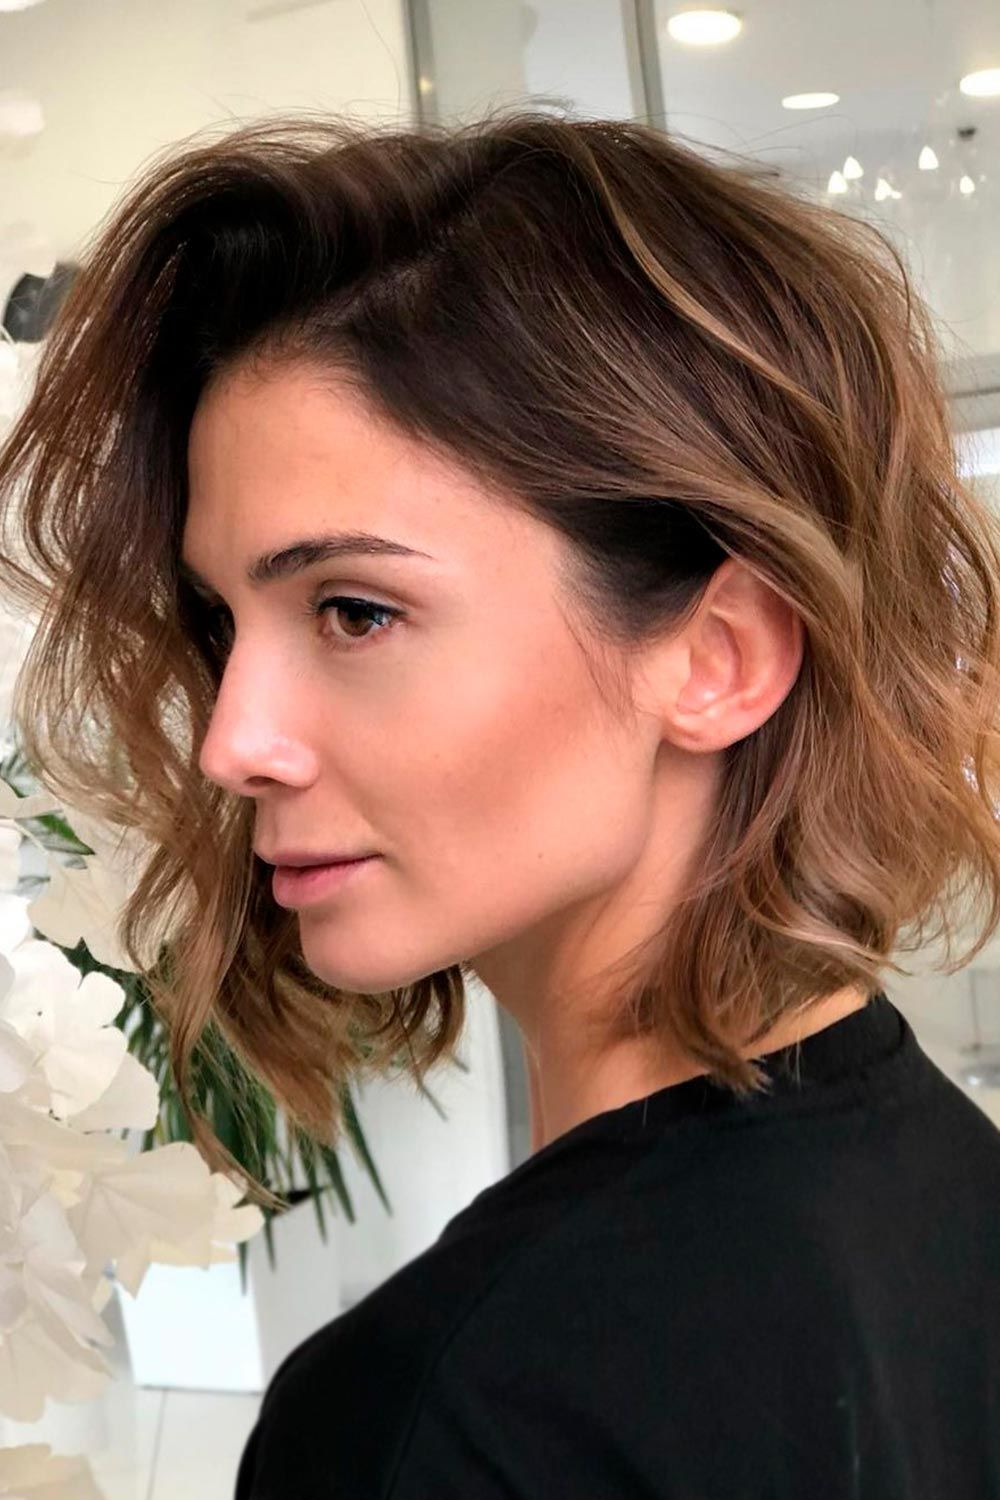 Short Hairstyles for Heart face 23 Heart shape face hairstyle female | Heart shaped face hairstyles female | Short Hairstyles for Heart Face Short Hairstyles for Heart Face Women